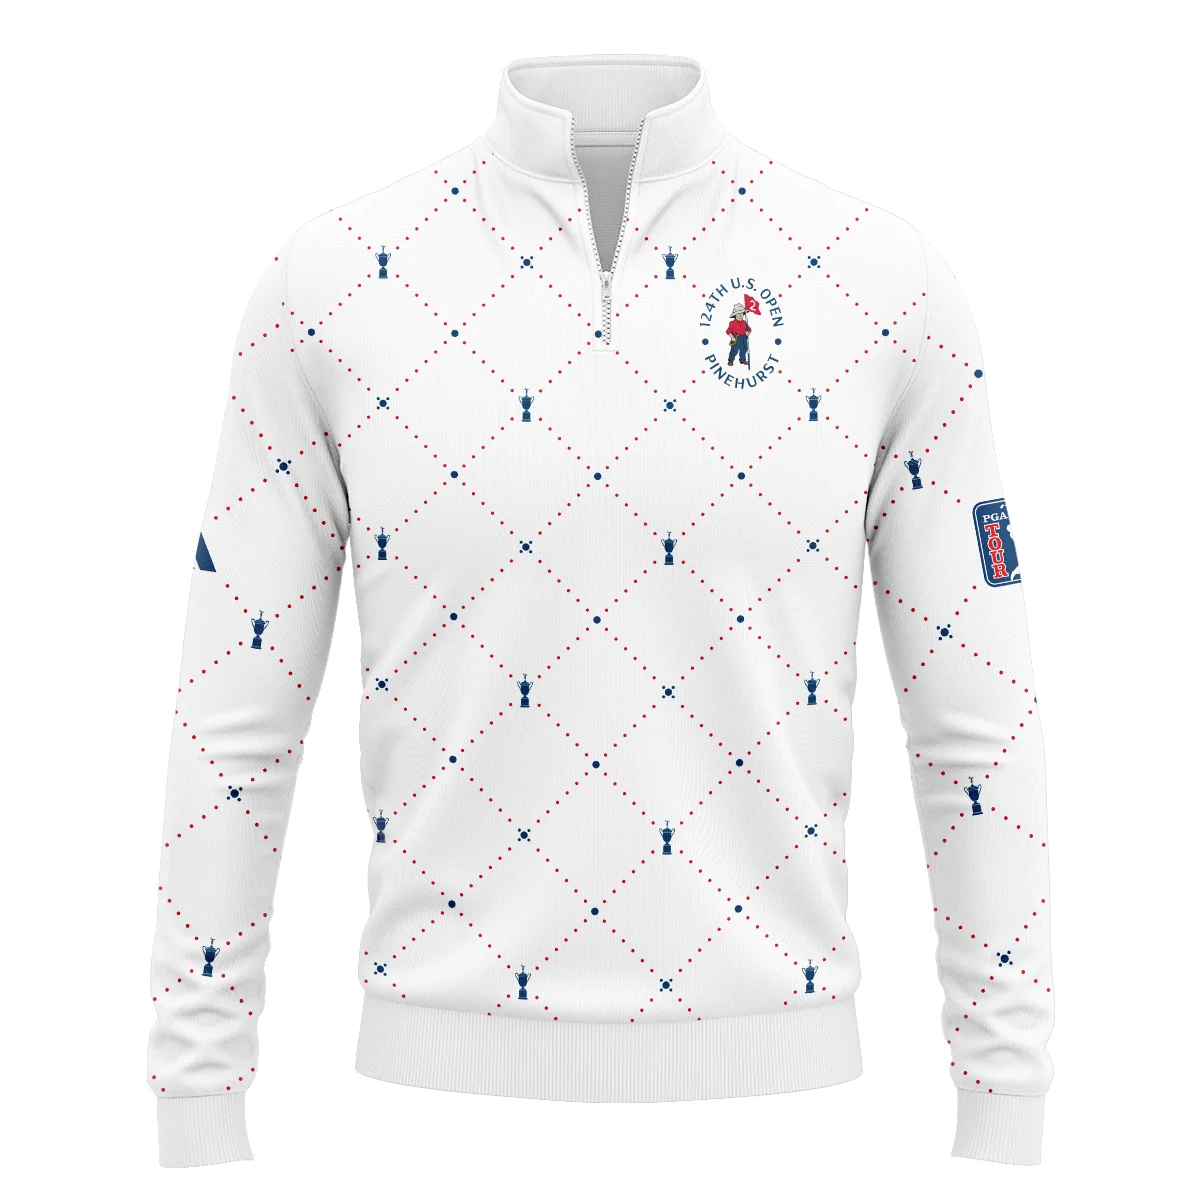 Argyle Pattern With Cup 124th U.S. Open Pinehurst Adidas Style Classic, Short Sleeve Polo Shirts Quarter-Zip Casual Slim Fit Mock Neck Basic